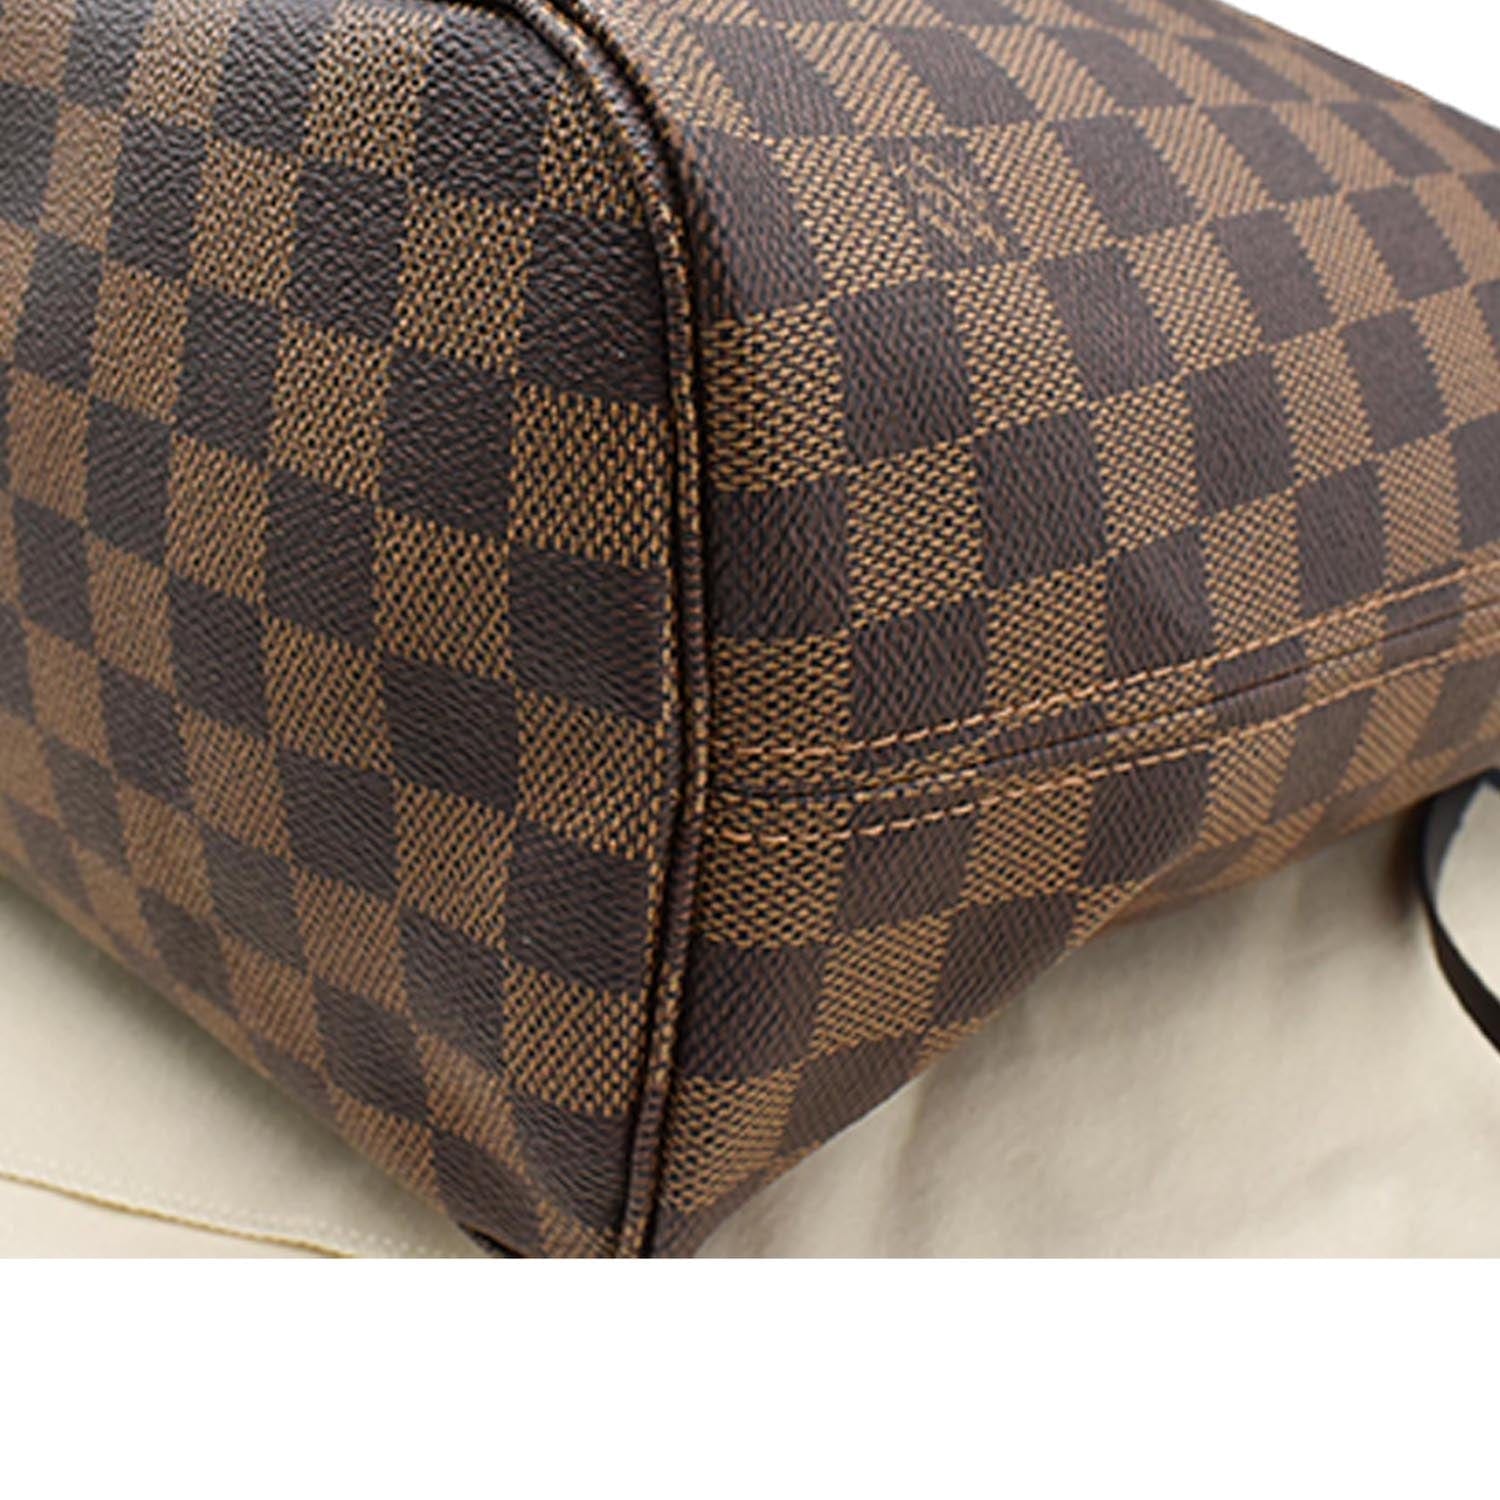 Louis Vuitton Neverfull MM - Damier Ebene With Rose Ballerine  Louis  vuitton handbags neverfull, Louis vuitton handbags, Vintage louis vuitton  handbags